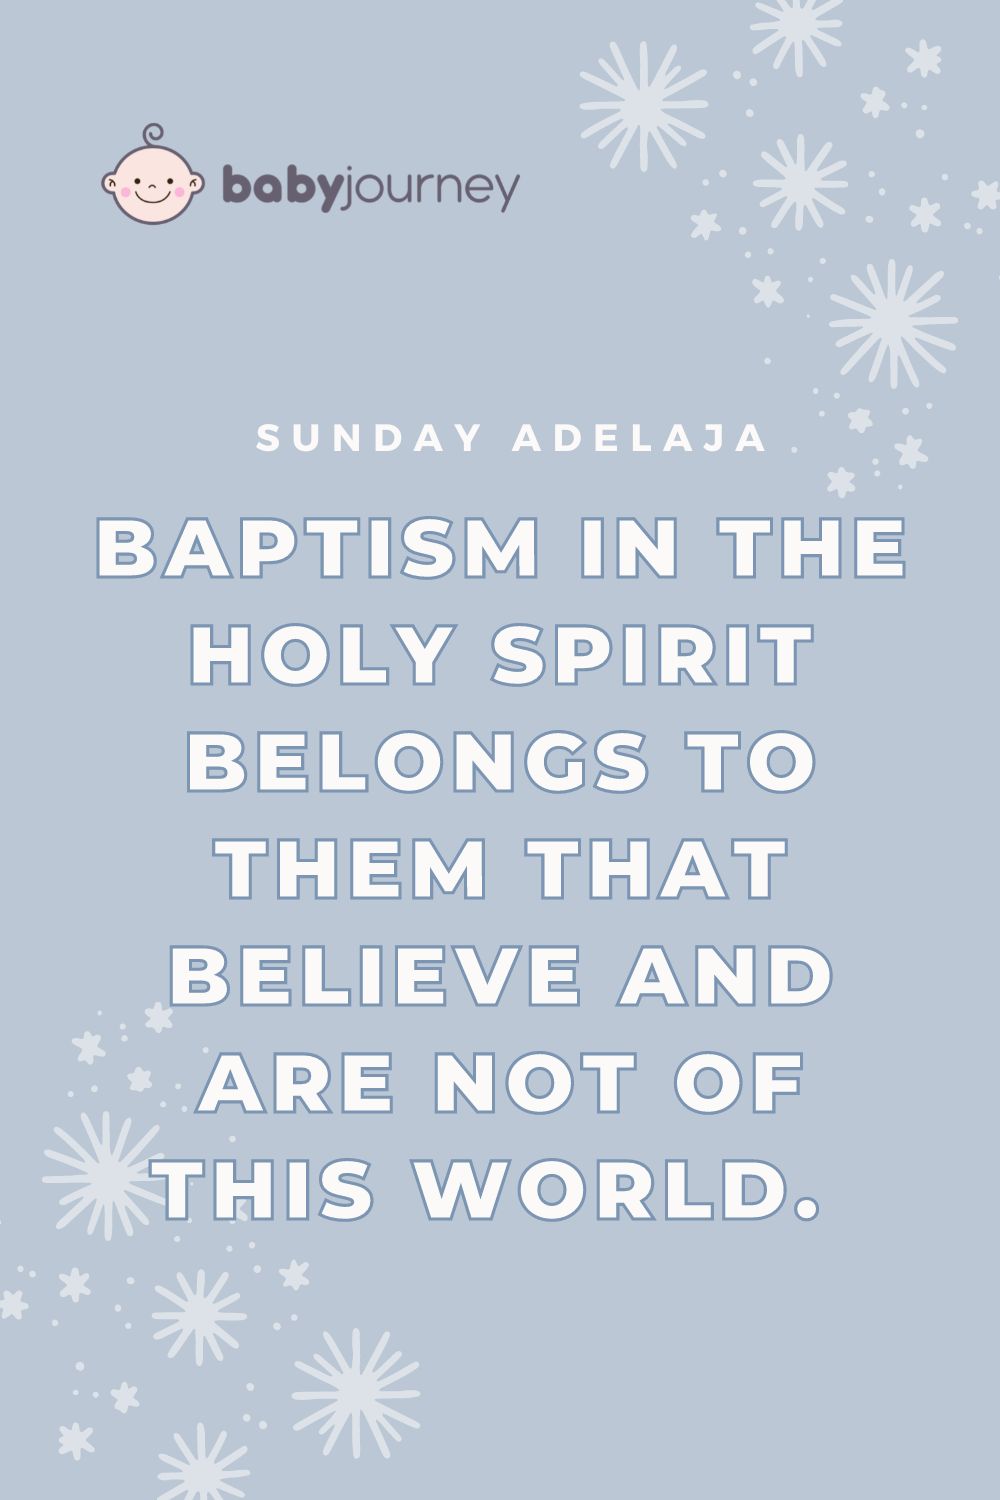 Baptism in the Holy Spirit belongs to them that believe and are not of this world. - Sunday Adelaja - Baptism quotes - Baby Journey